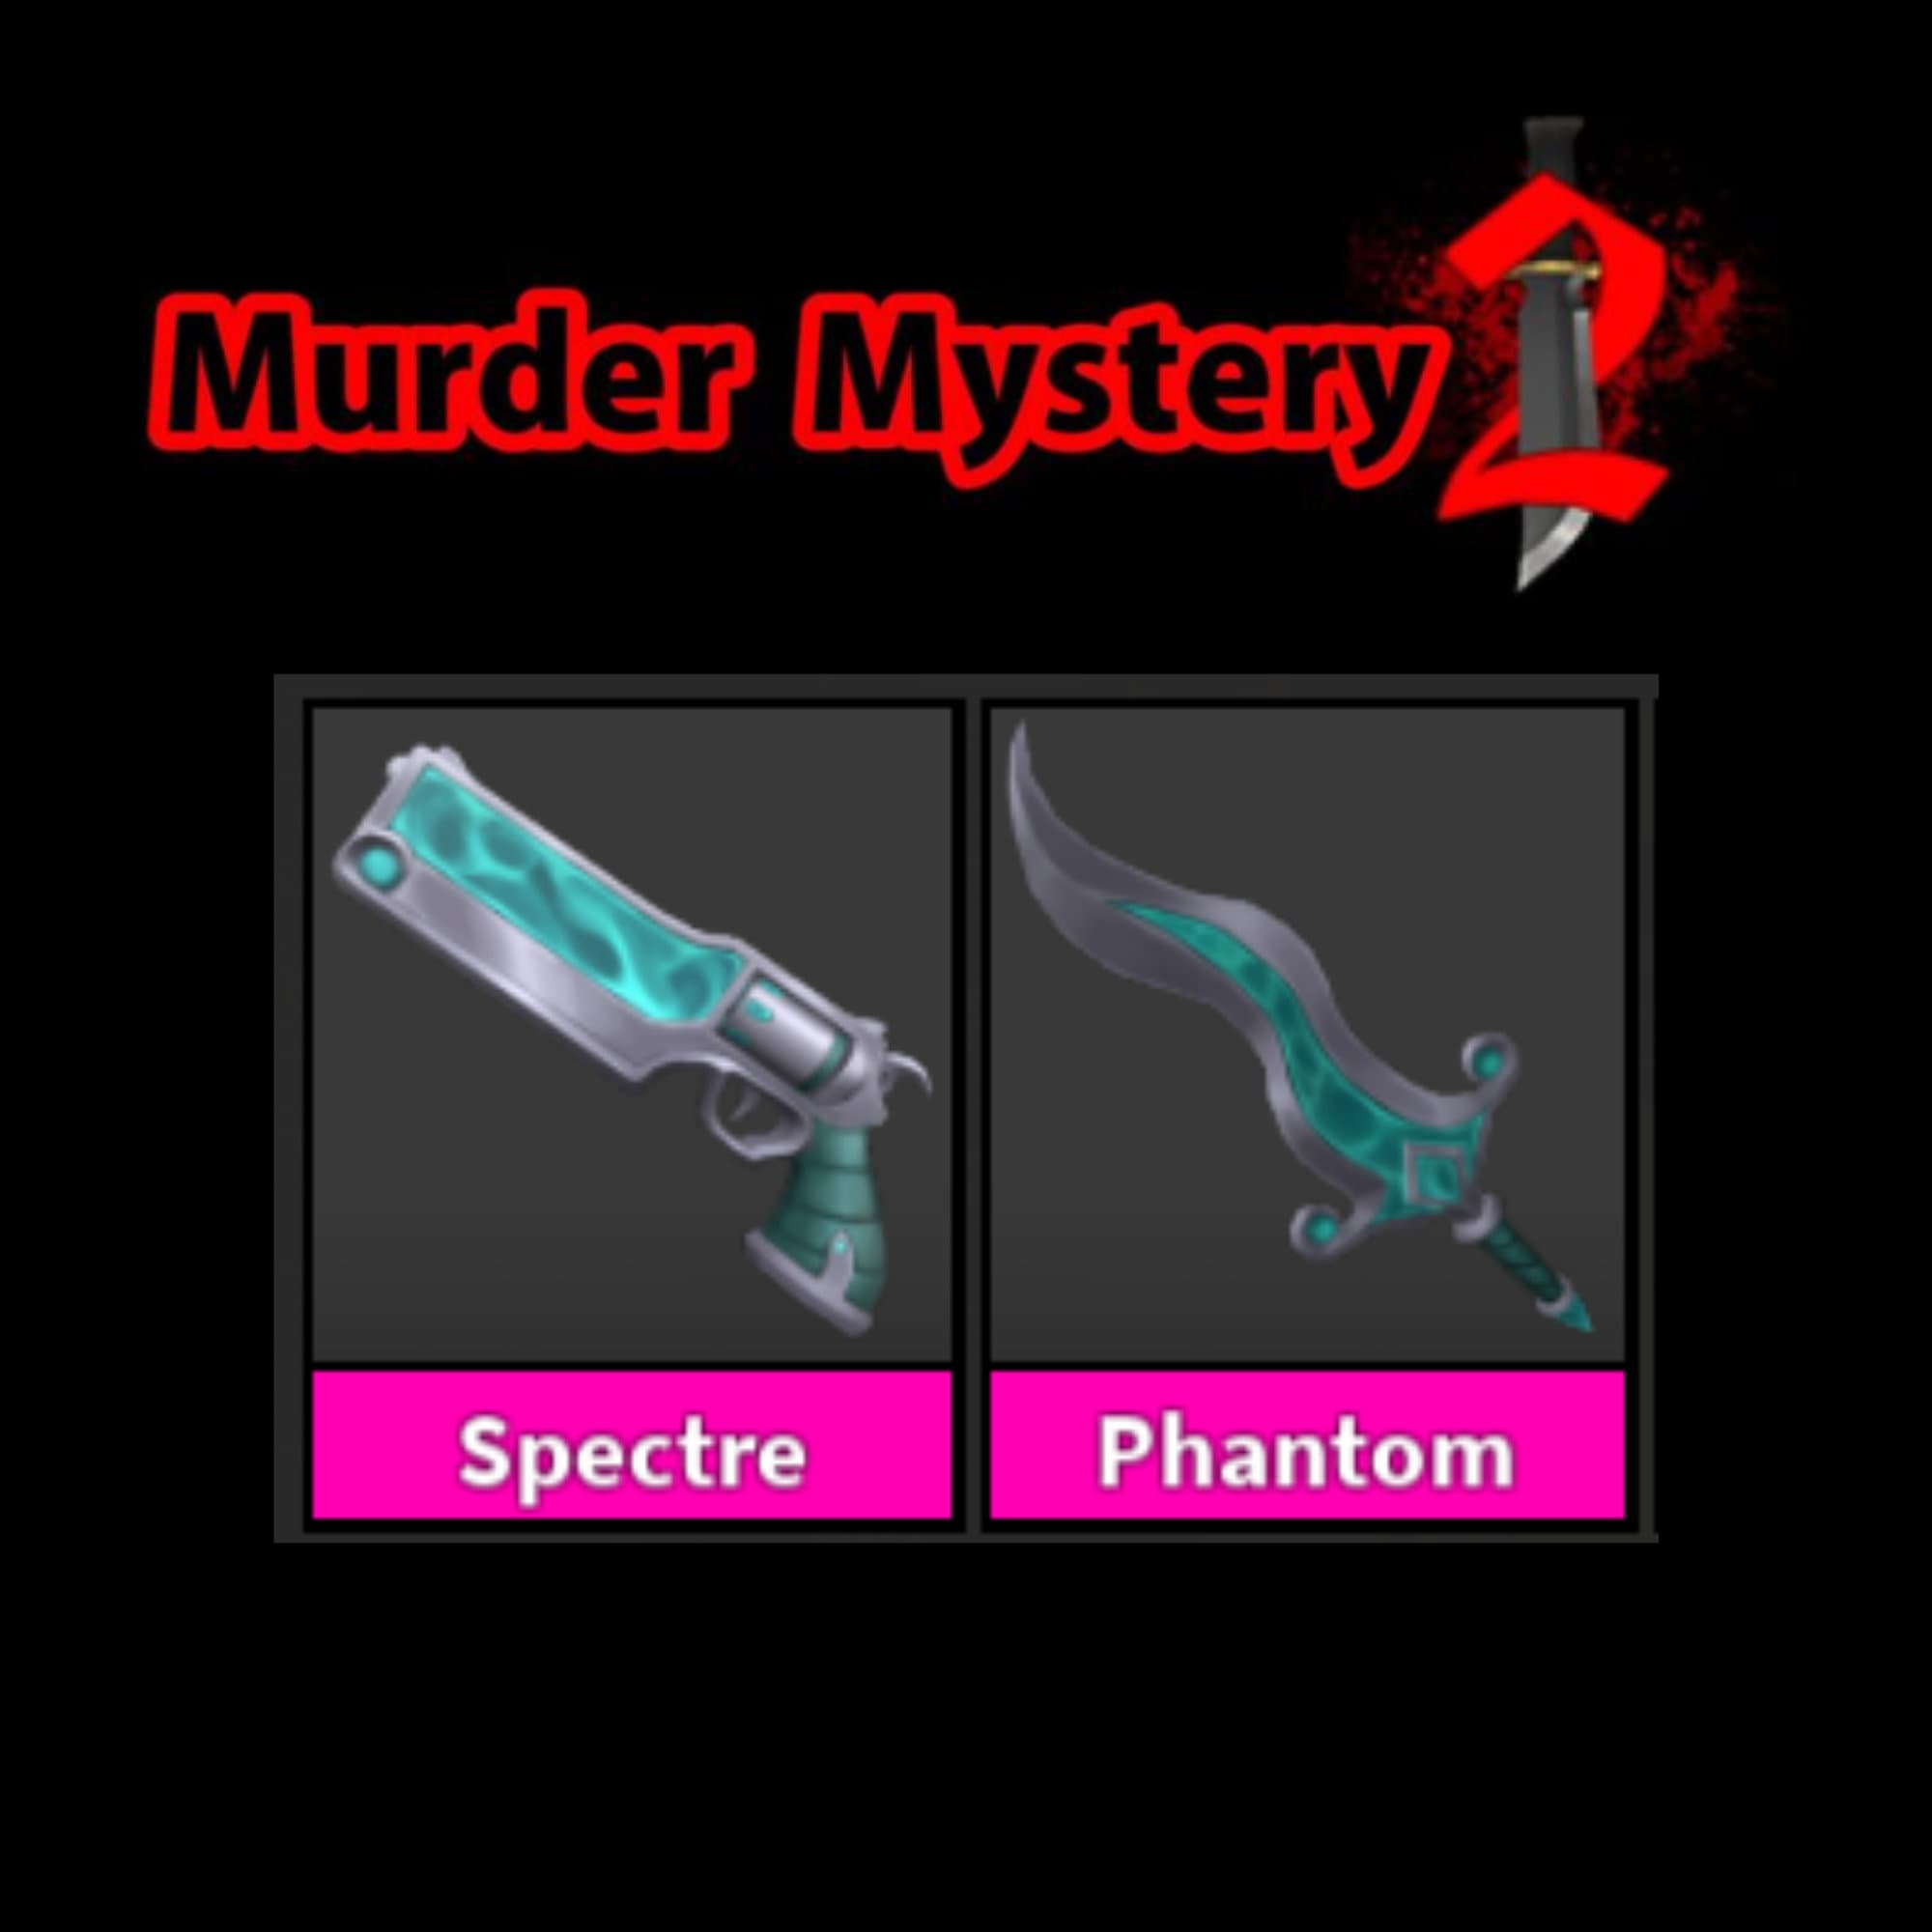 Roblox Murder Mystery 2 MM2 Harvester Ancient Godly Knifes and Guns